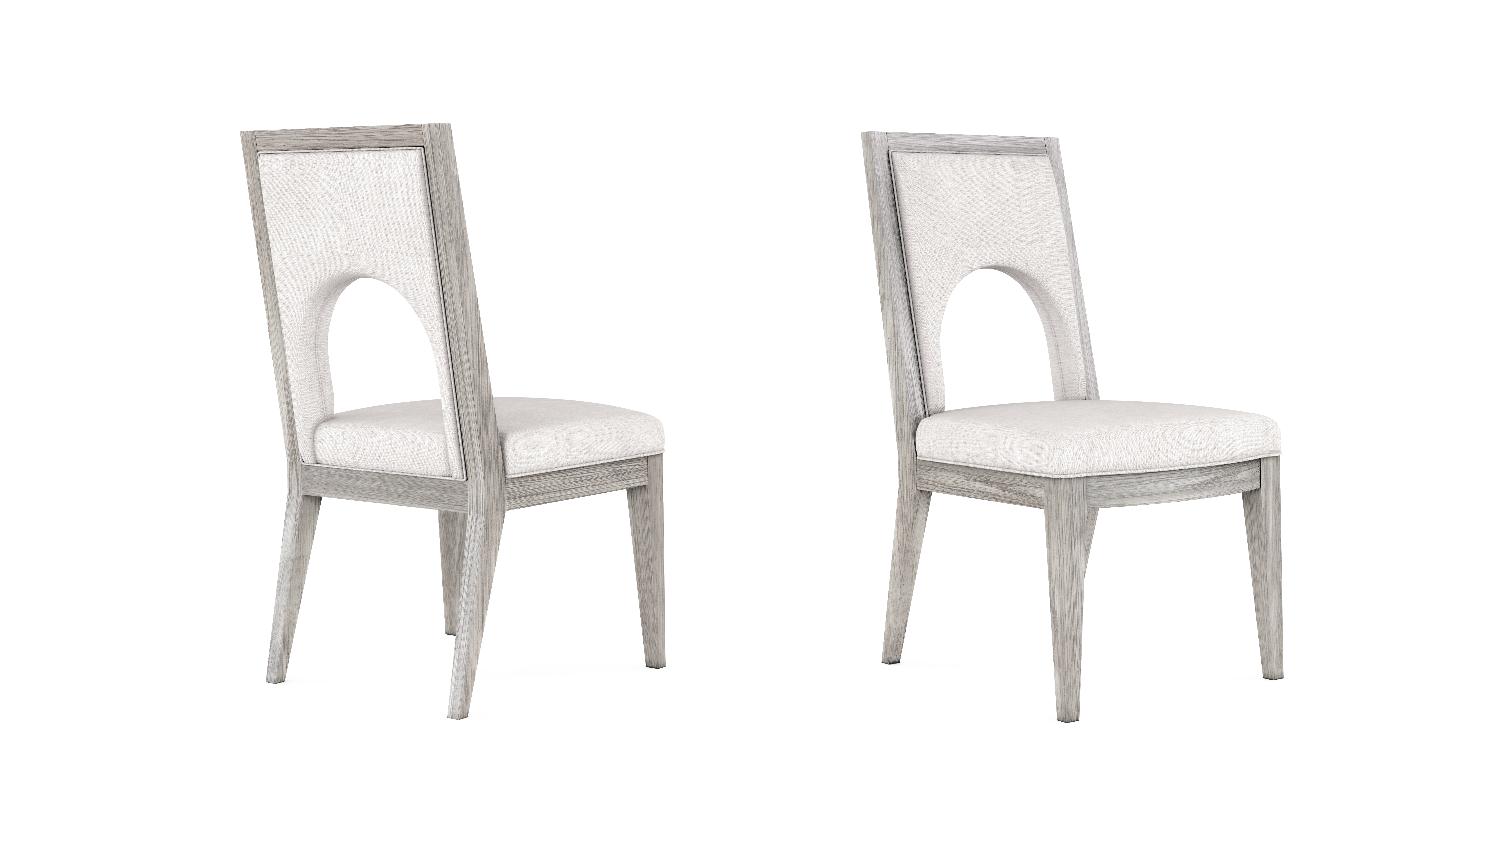 Modern, Casual Side Chair Set Vault 285206-2354 in Gray Fabric